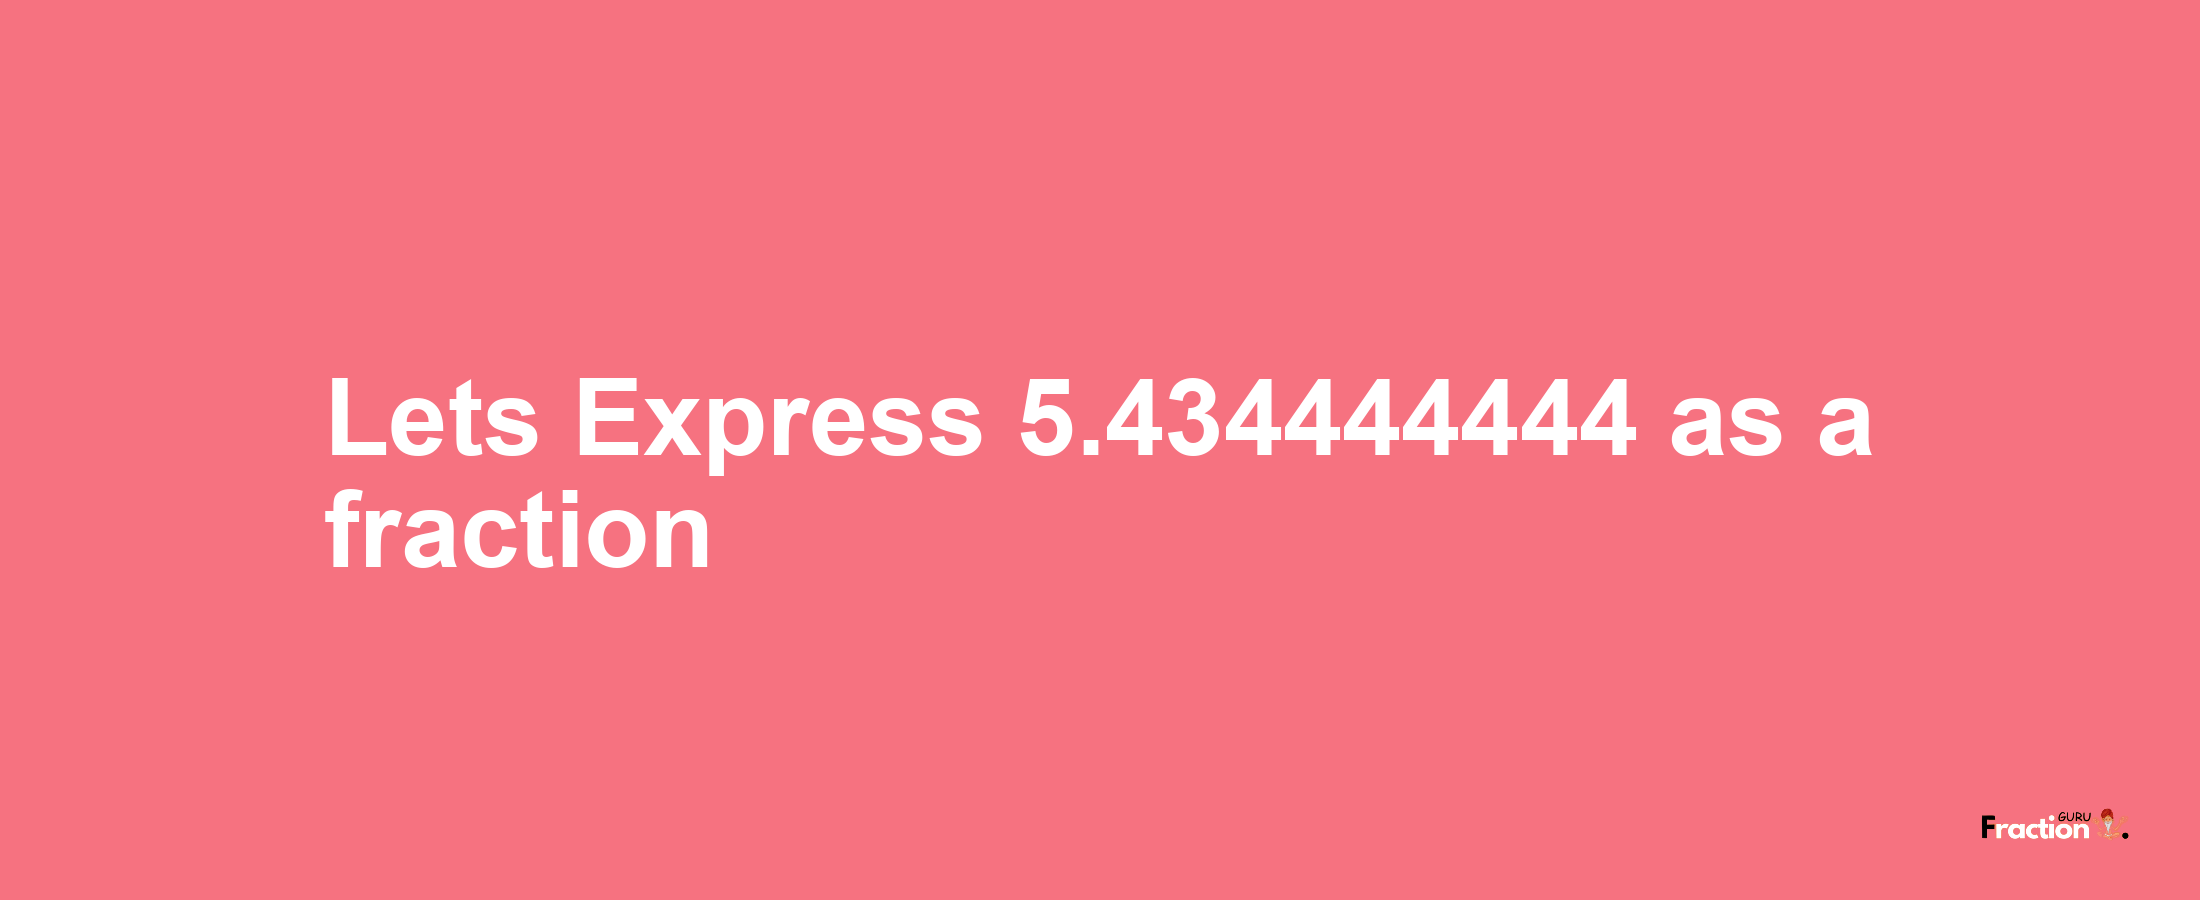 Lets Express 5.434444444 as afraction